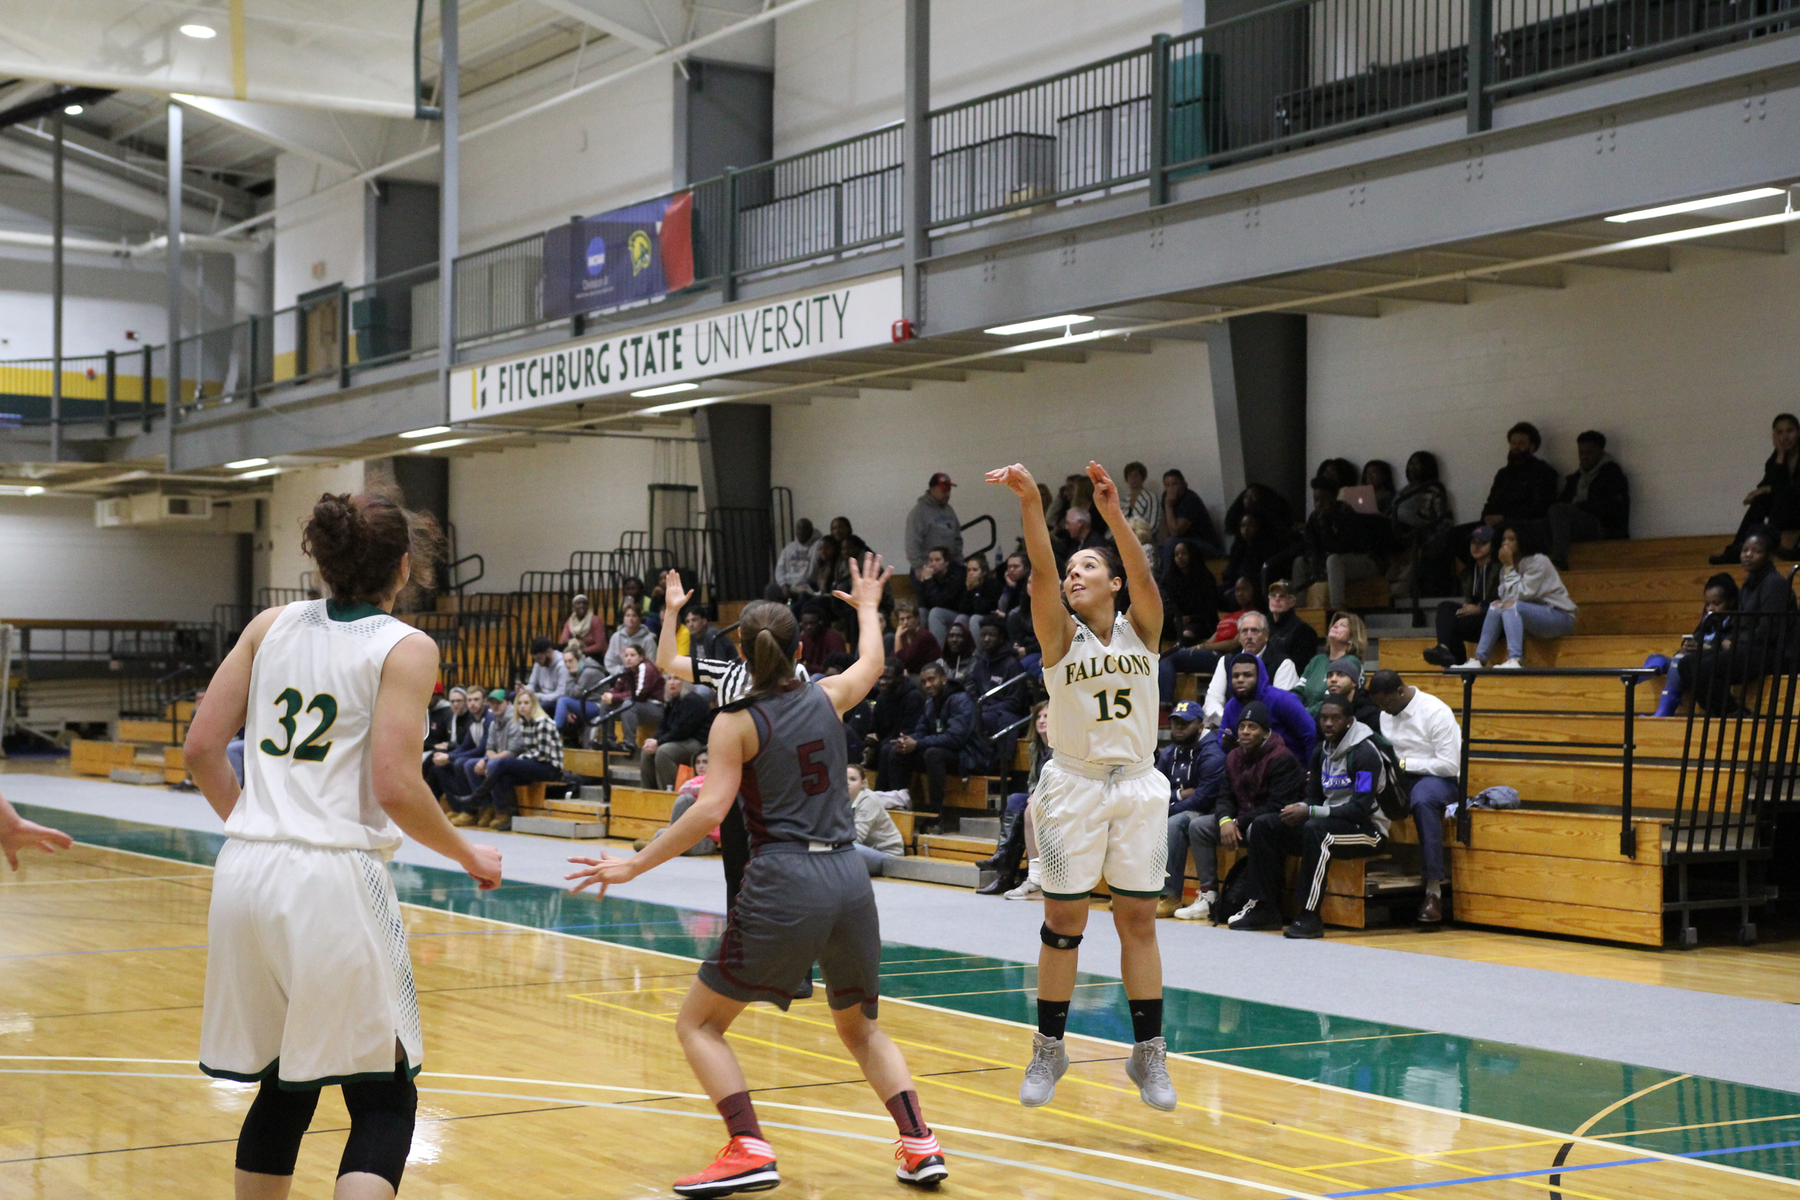 Westfield State Tops Fitchburg State, 108-55